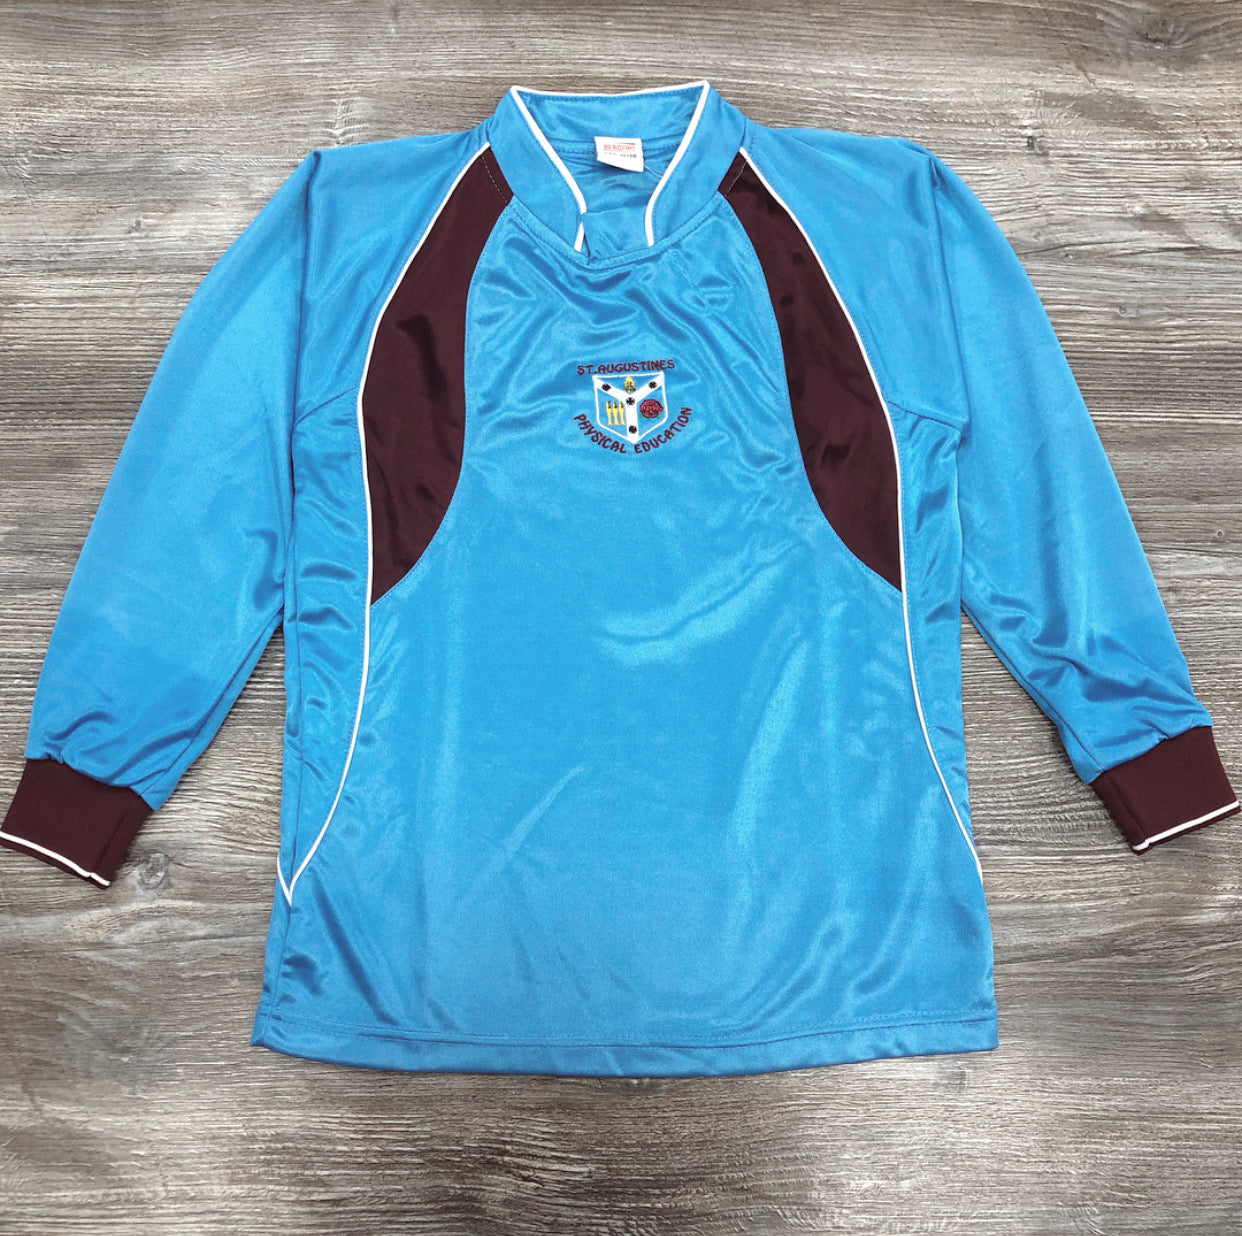 DISCONTINUED. - St Augustine's Girls Sports Top